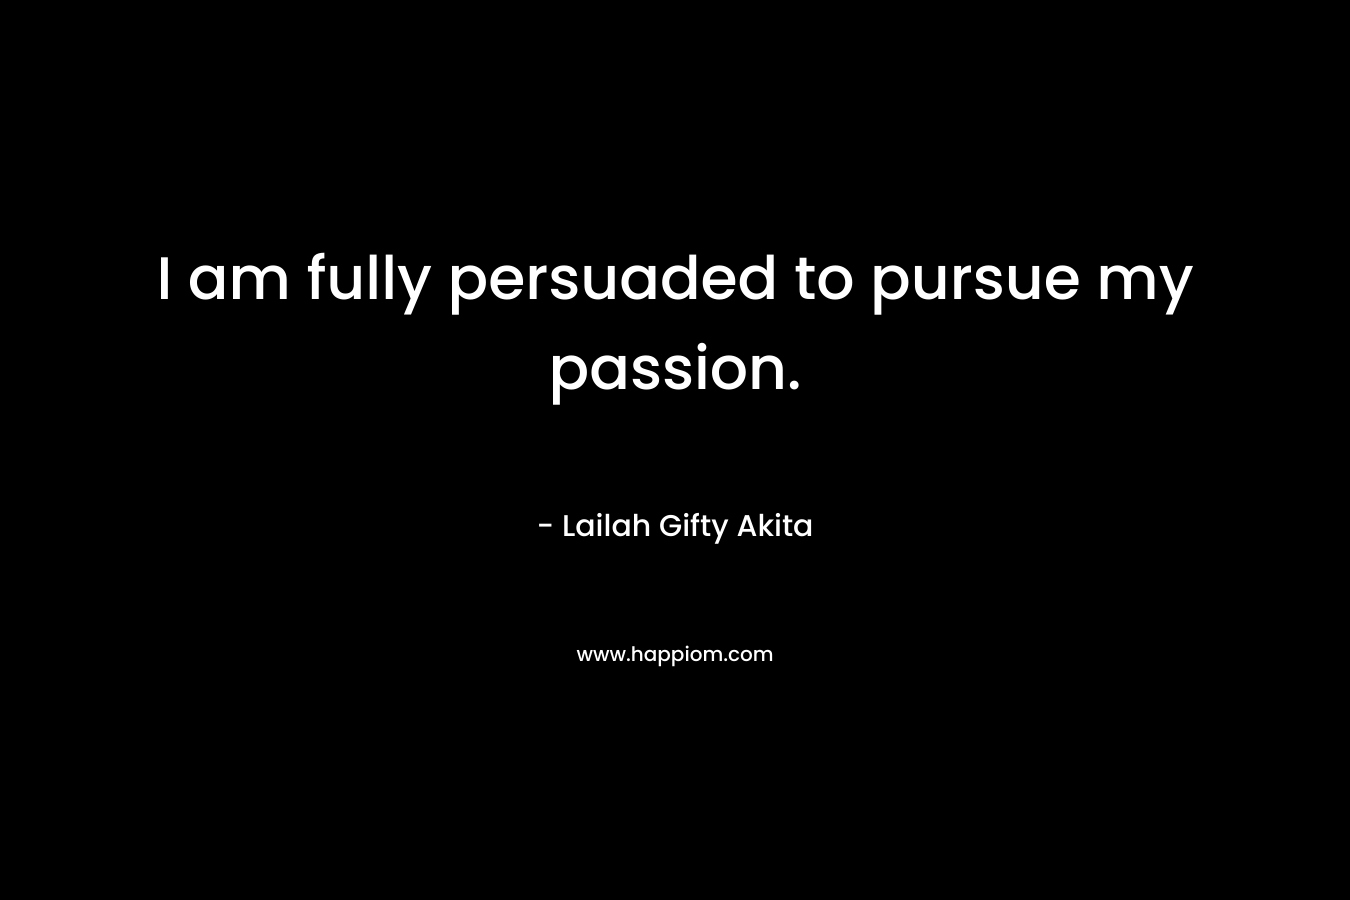 I am fully persuaded to pursue my passion.